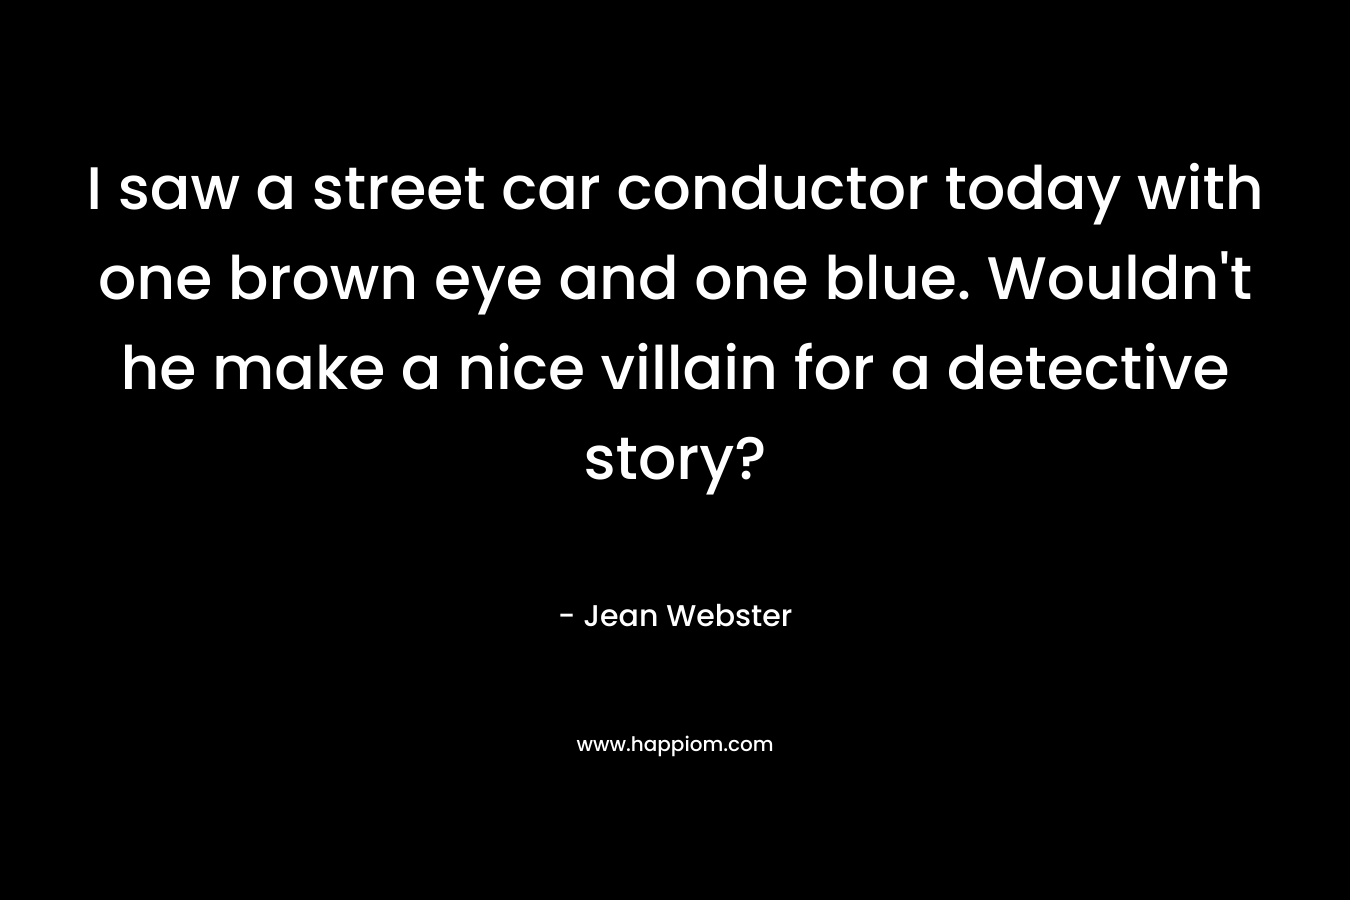 I saw a street car conductor today with one brown eye and one blue. Wouldn't he make a nice villain for a detective story?